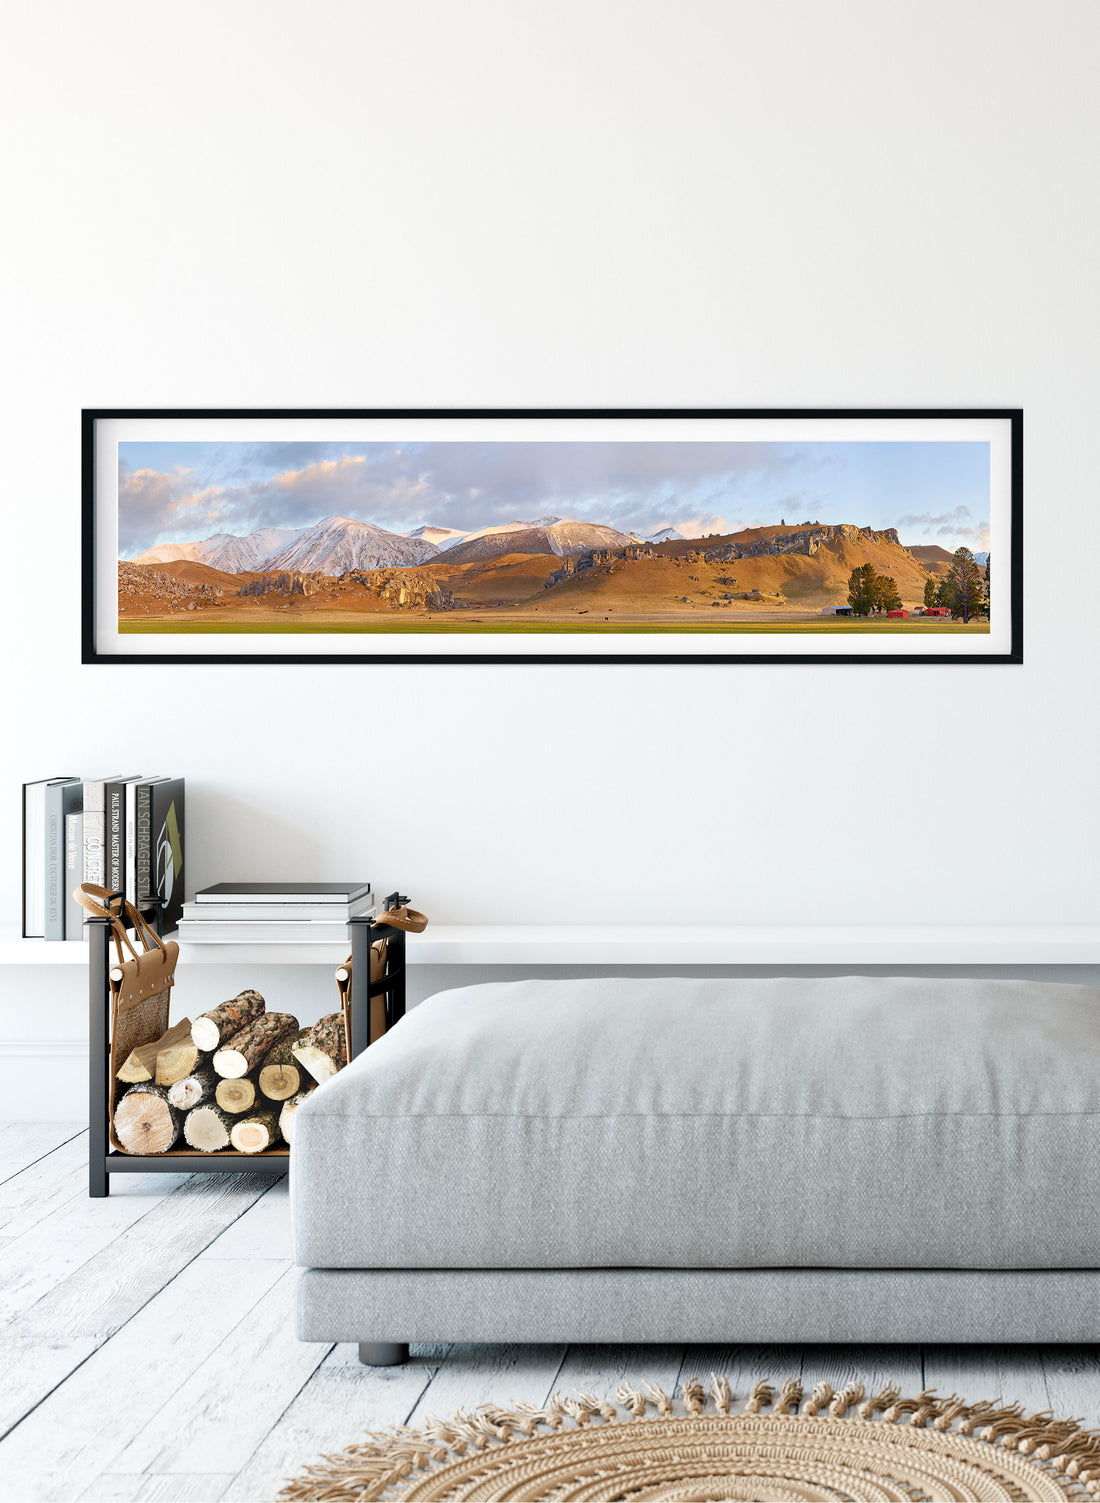 King Of The Castle - Photographic Print